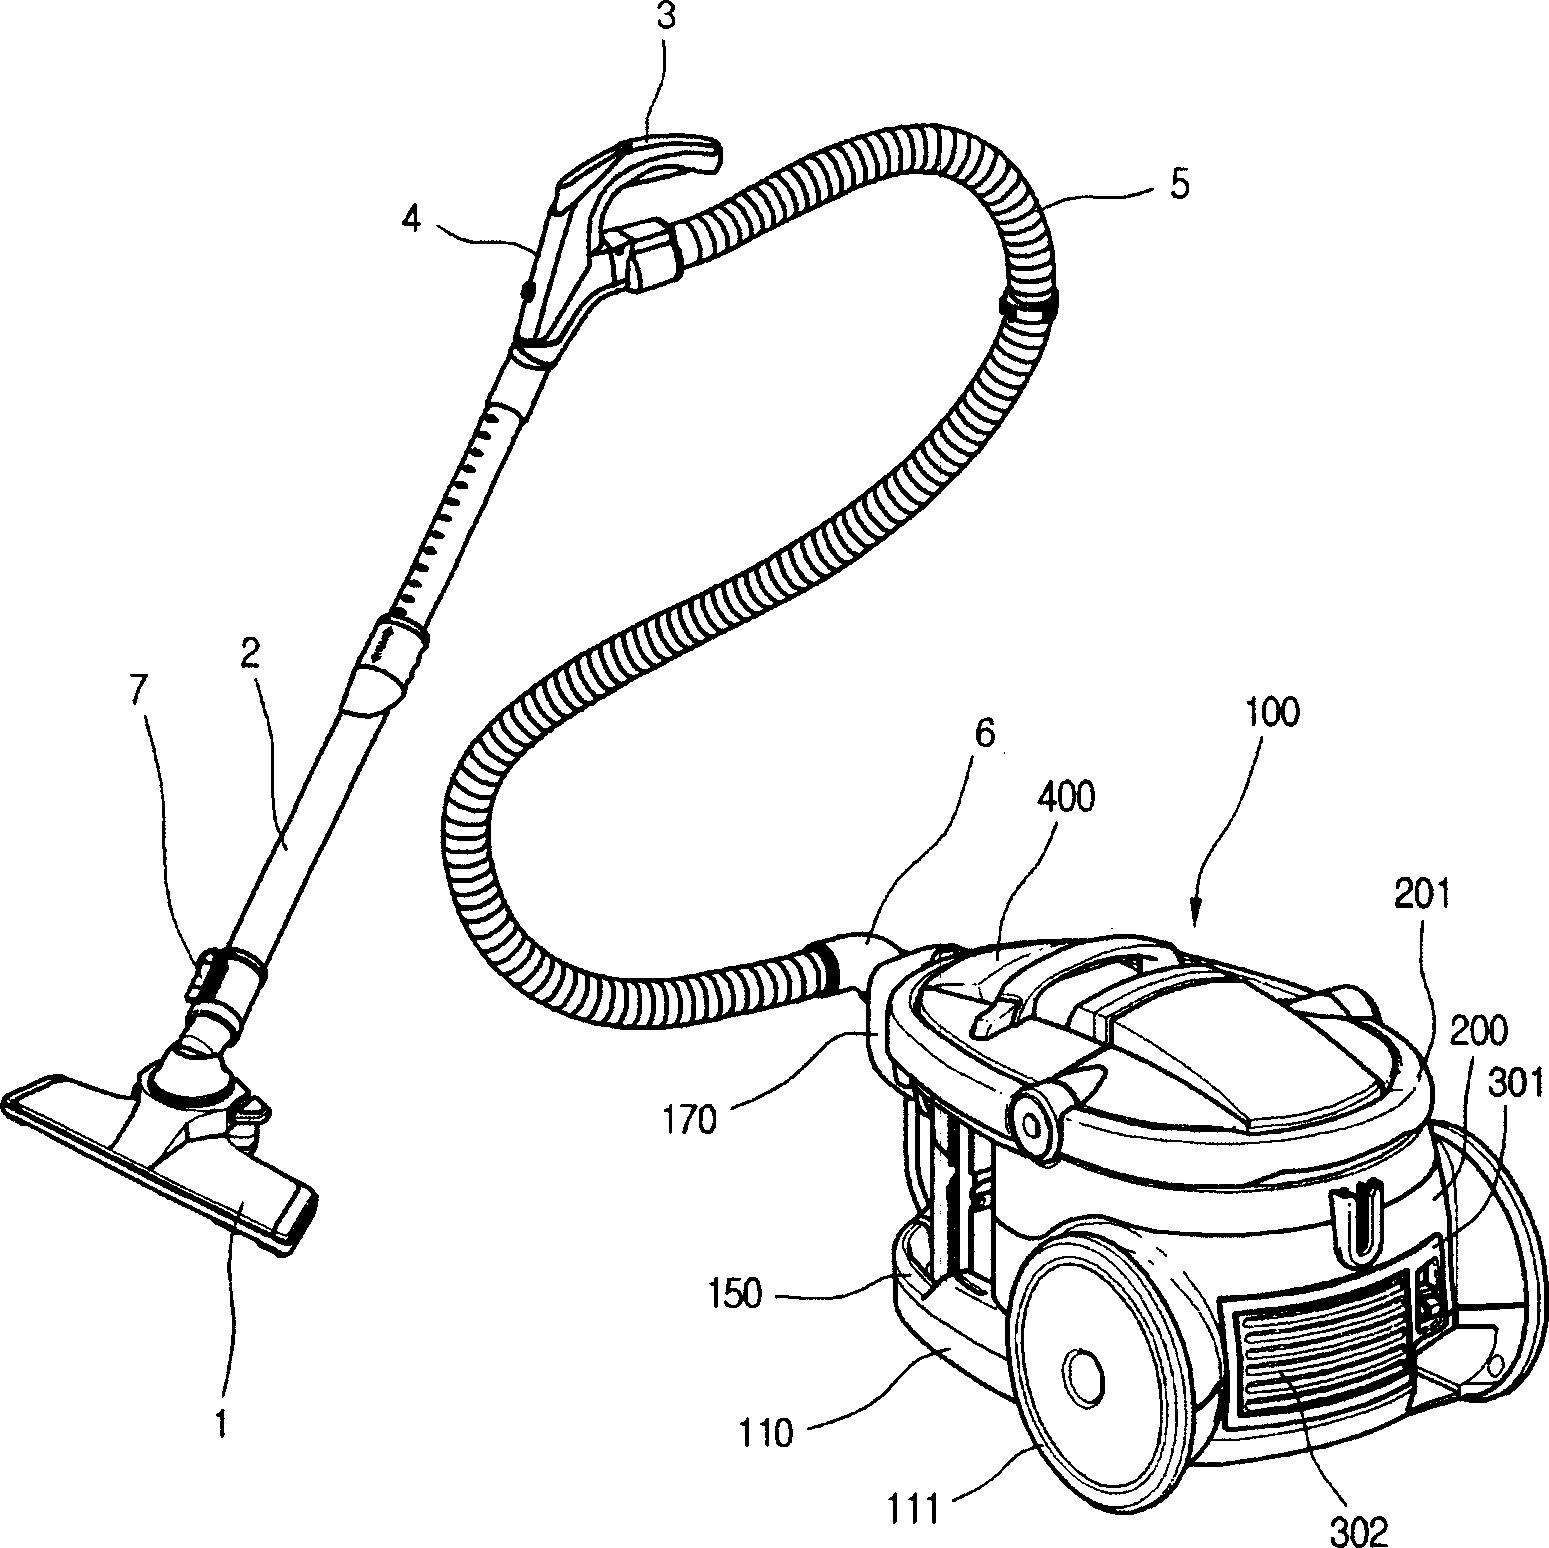 Dust collection unit of vacuum cleaner